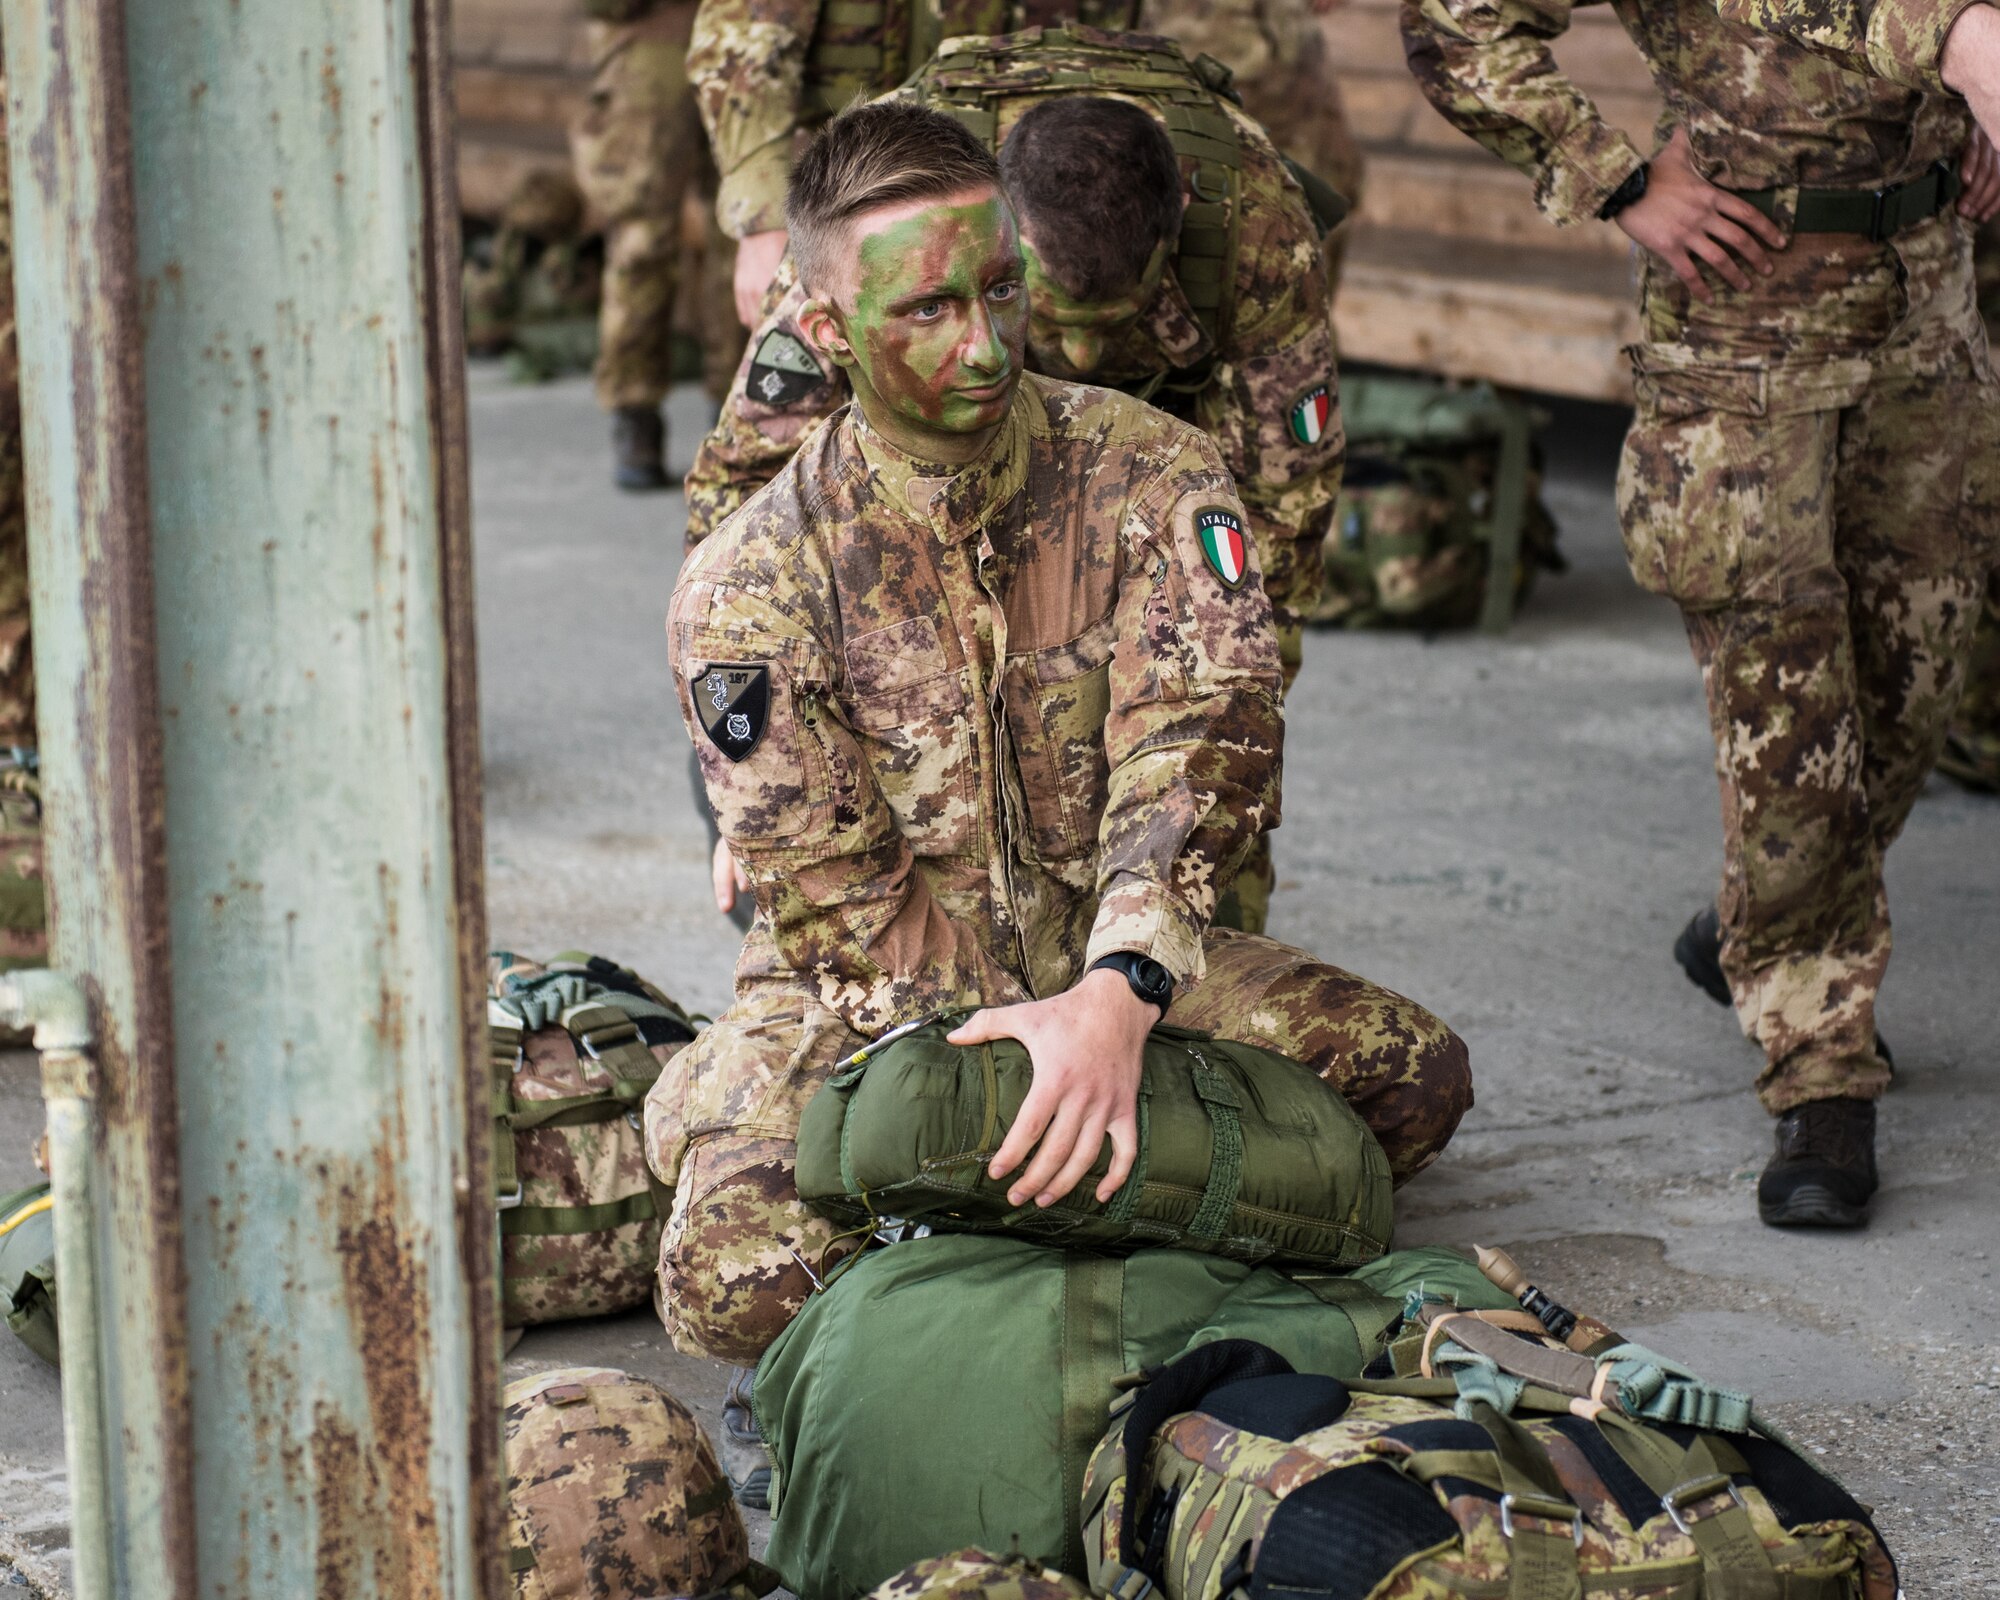 A member of the Italian Folgore, an airborne paratrooper brigade from the Italian Army, prepares to execute an airdrop mission alongside members of the Kentucky Air National Guard’s 123rd Airlift Wing in Pisa, Italy, Nov. 7, 2019. The mission was part of Mangusta 19, a bi-lateral exercise designed to promote readiness and interoperability among NATO allies. (U.S. Air National Guard photo by Senior Airman Chloe Ochs)